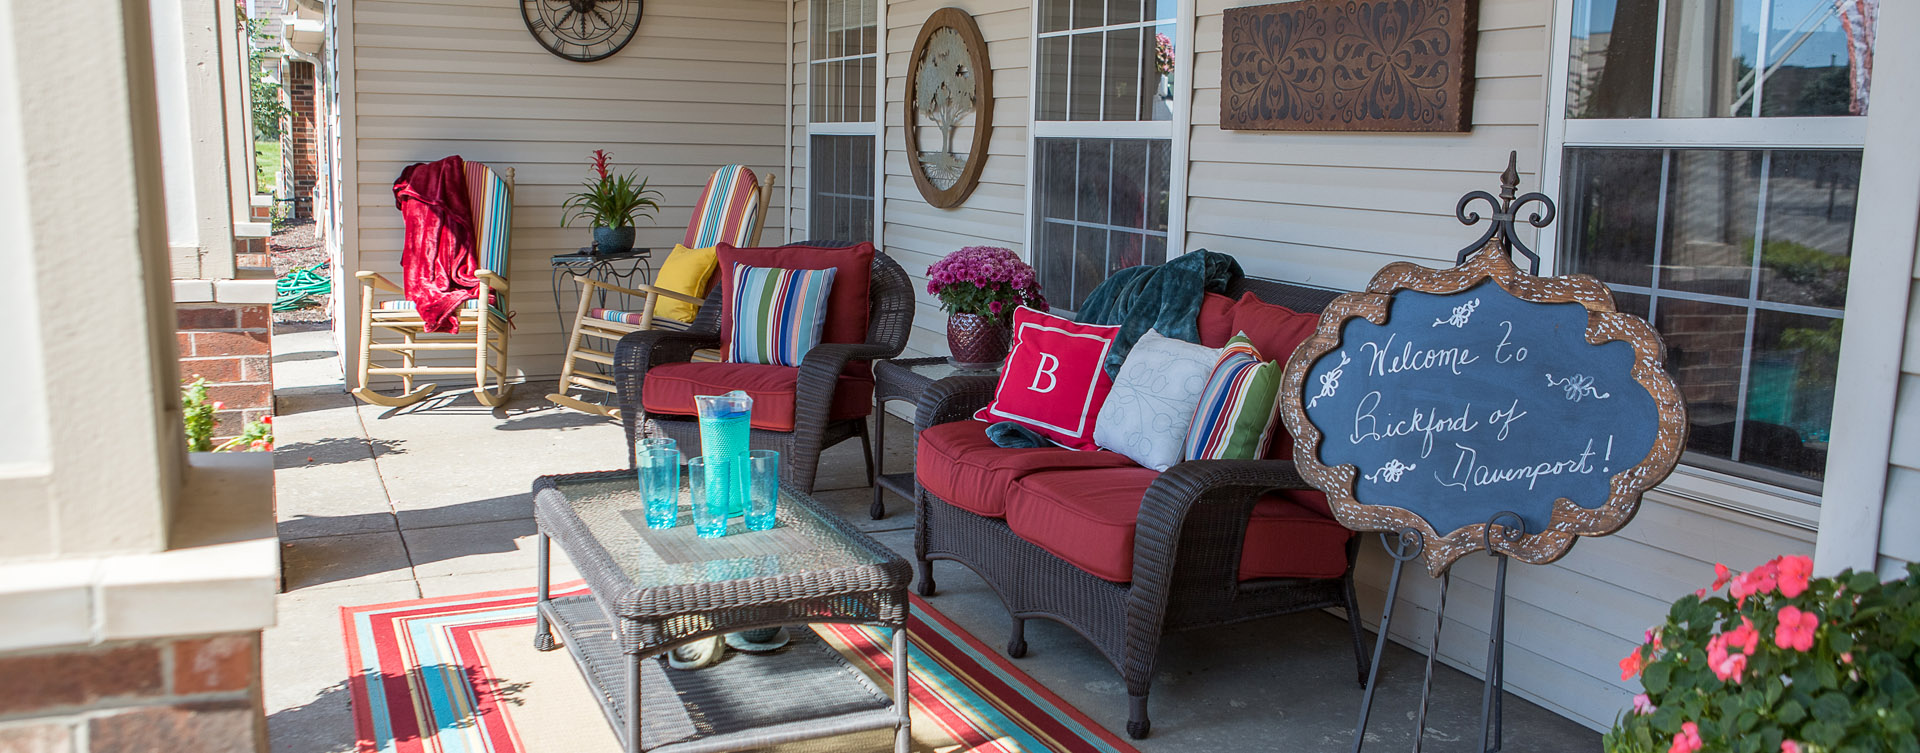 Relax in your favorite chair on the porch at Bickford of Davenport